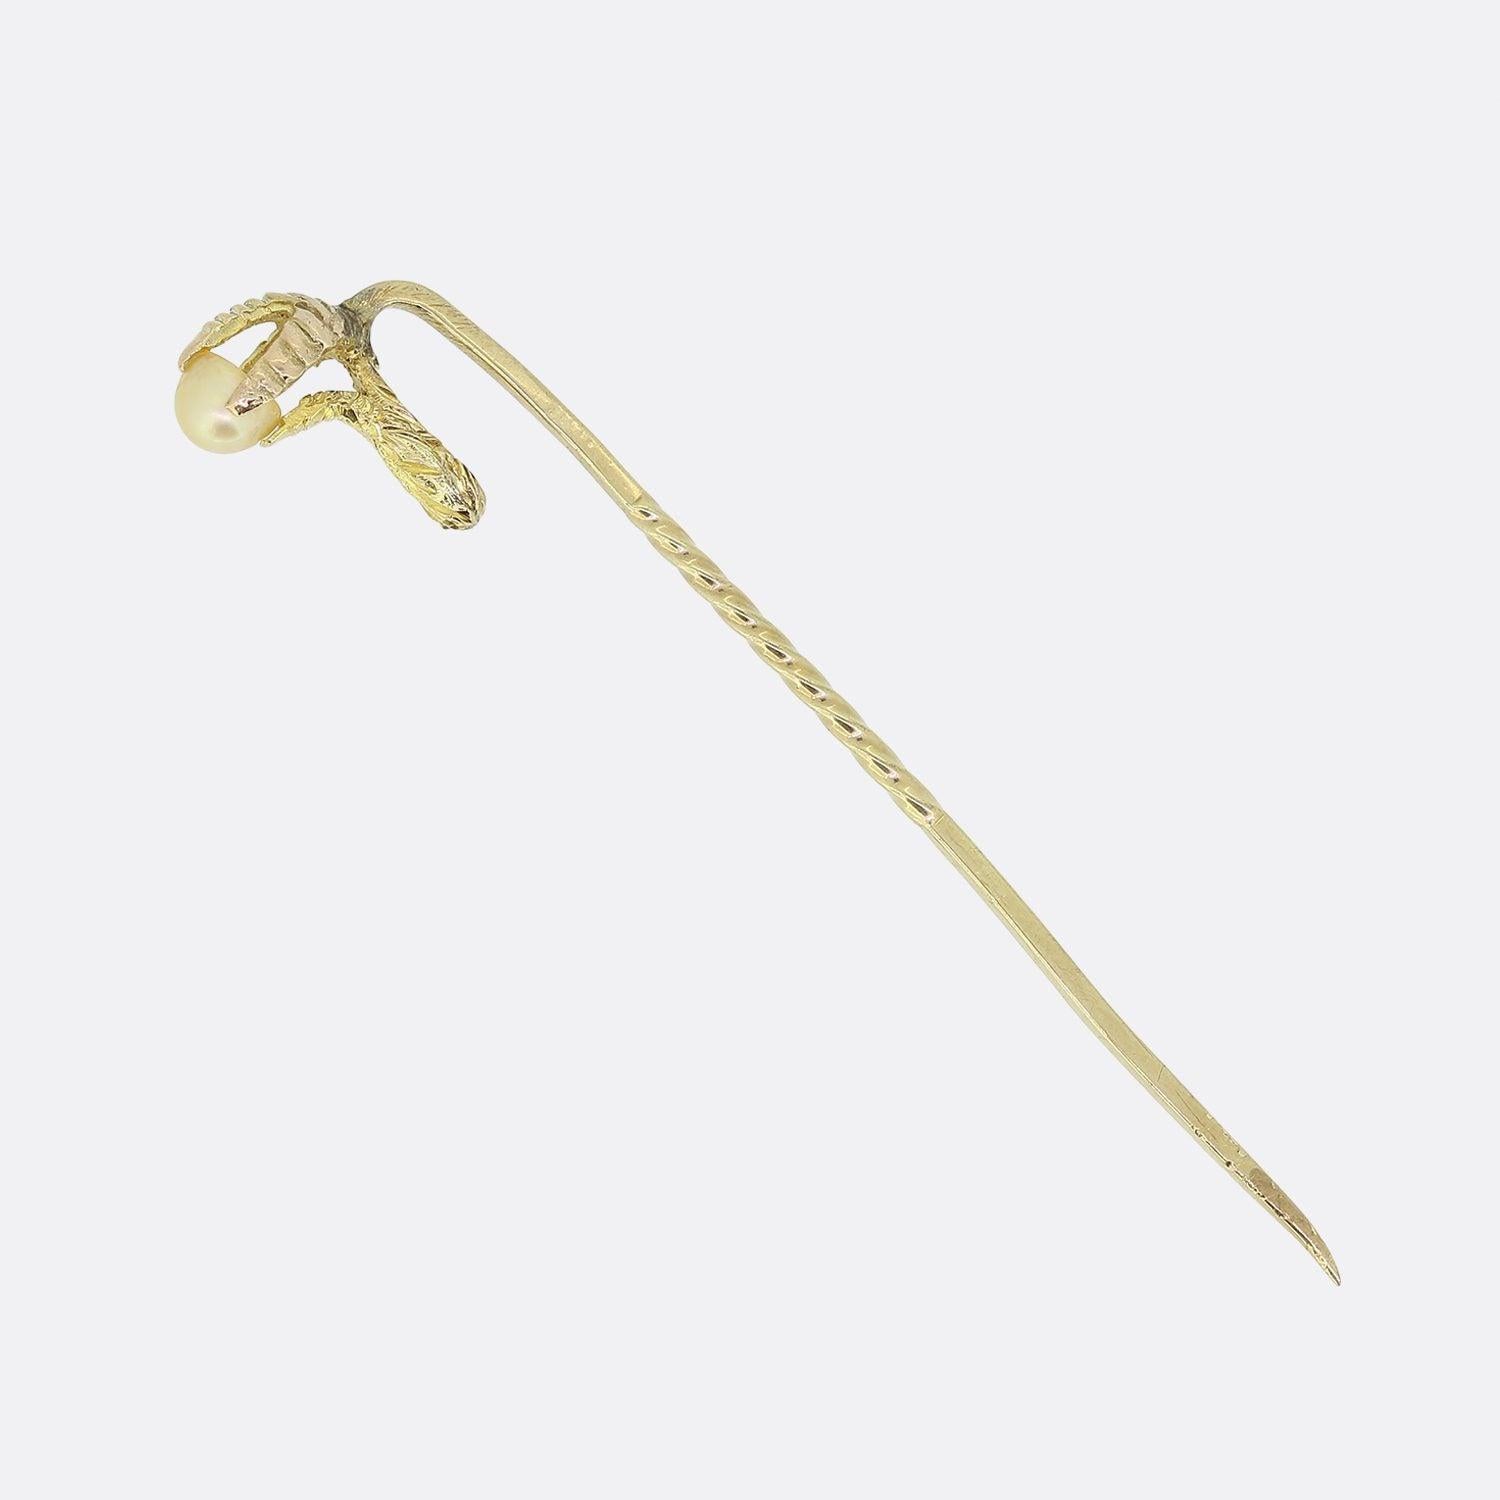 This is a high quality 9ct yellow gold pearl talon stick pin. The pin is from the Vintage era and features a single natural pearl.

Condition: Used (Very Good)
Weight: 2.7 grams
Head Dimensions: 13.5mm x 6.5mm
Dimensions: 60mm x 6mm
Natural Pearl: